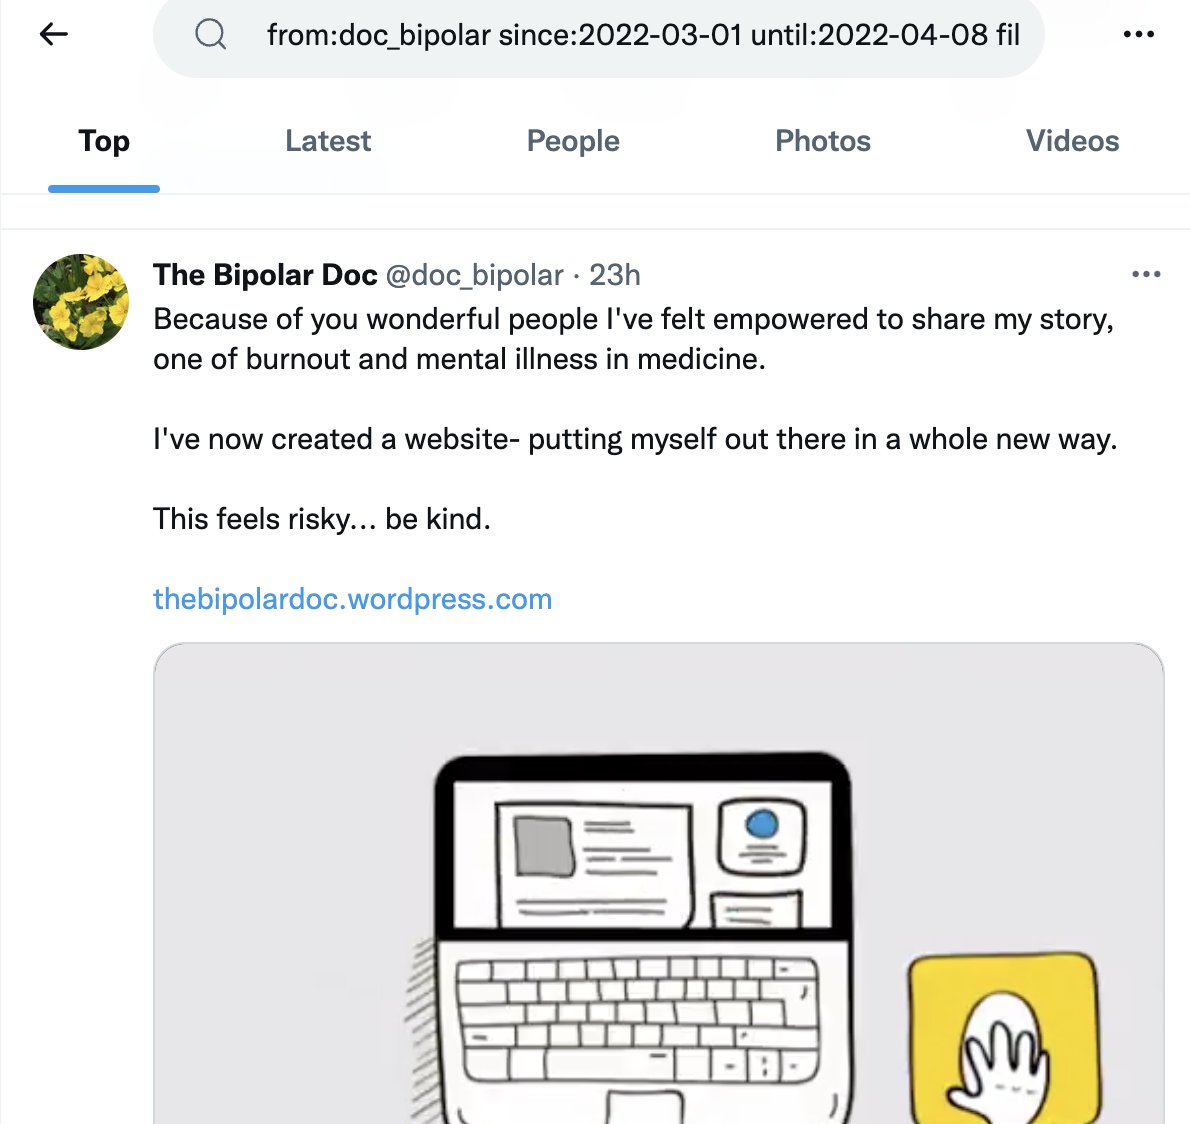 5. Find tweets from a particular time period.Add a date filter:since:until:Do you remember  @doc_bipolar sharing about her new blog but can't find the link?from:doc_biopolar since:2022-03-01 until:2022-04-08 filter:linksRemember to use the format YYYY-MM-DD